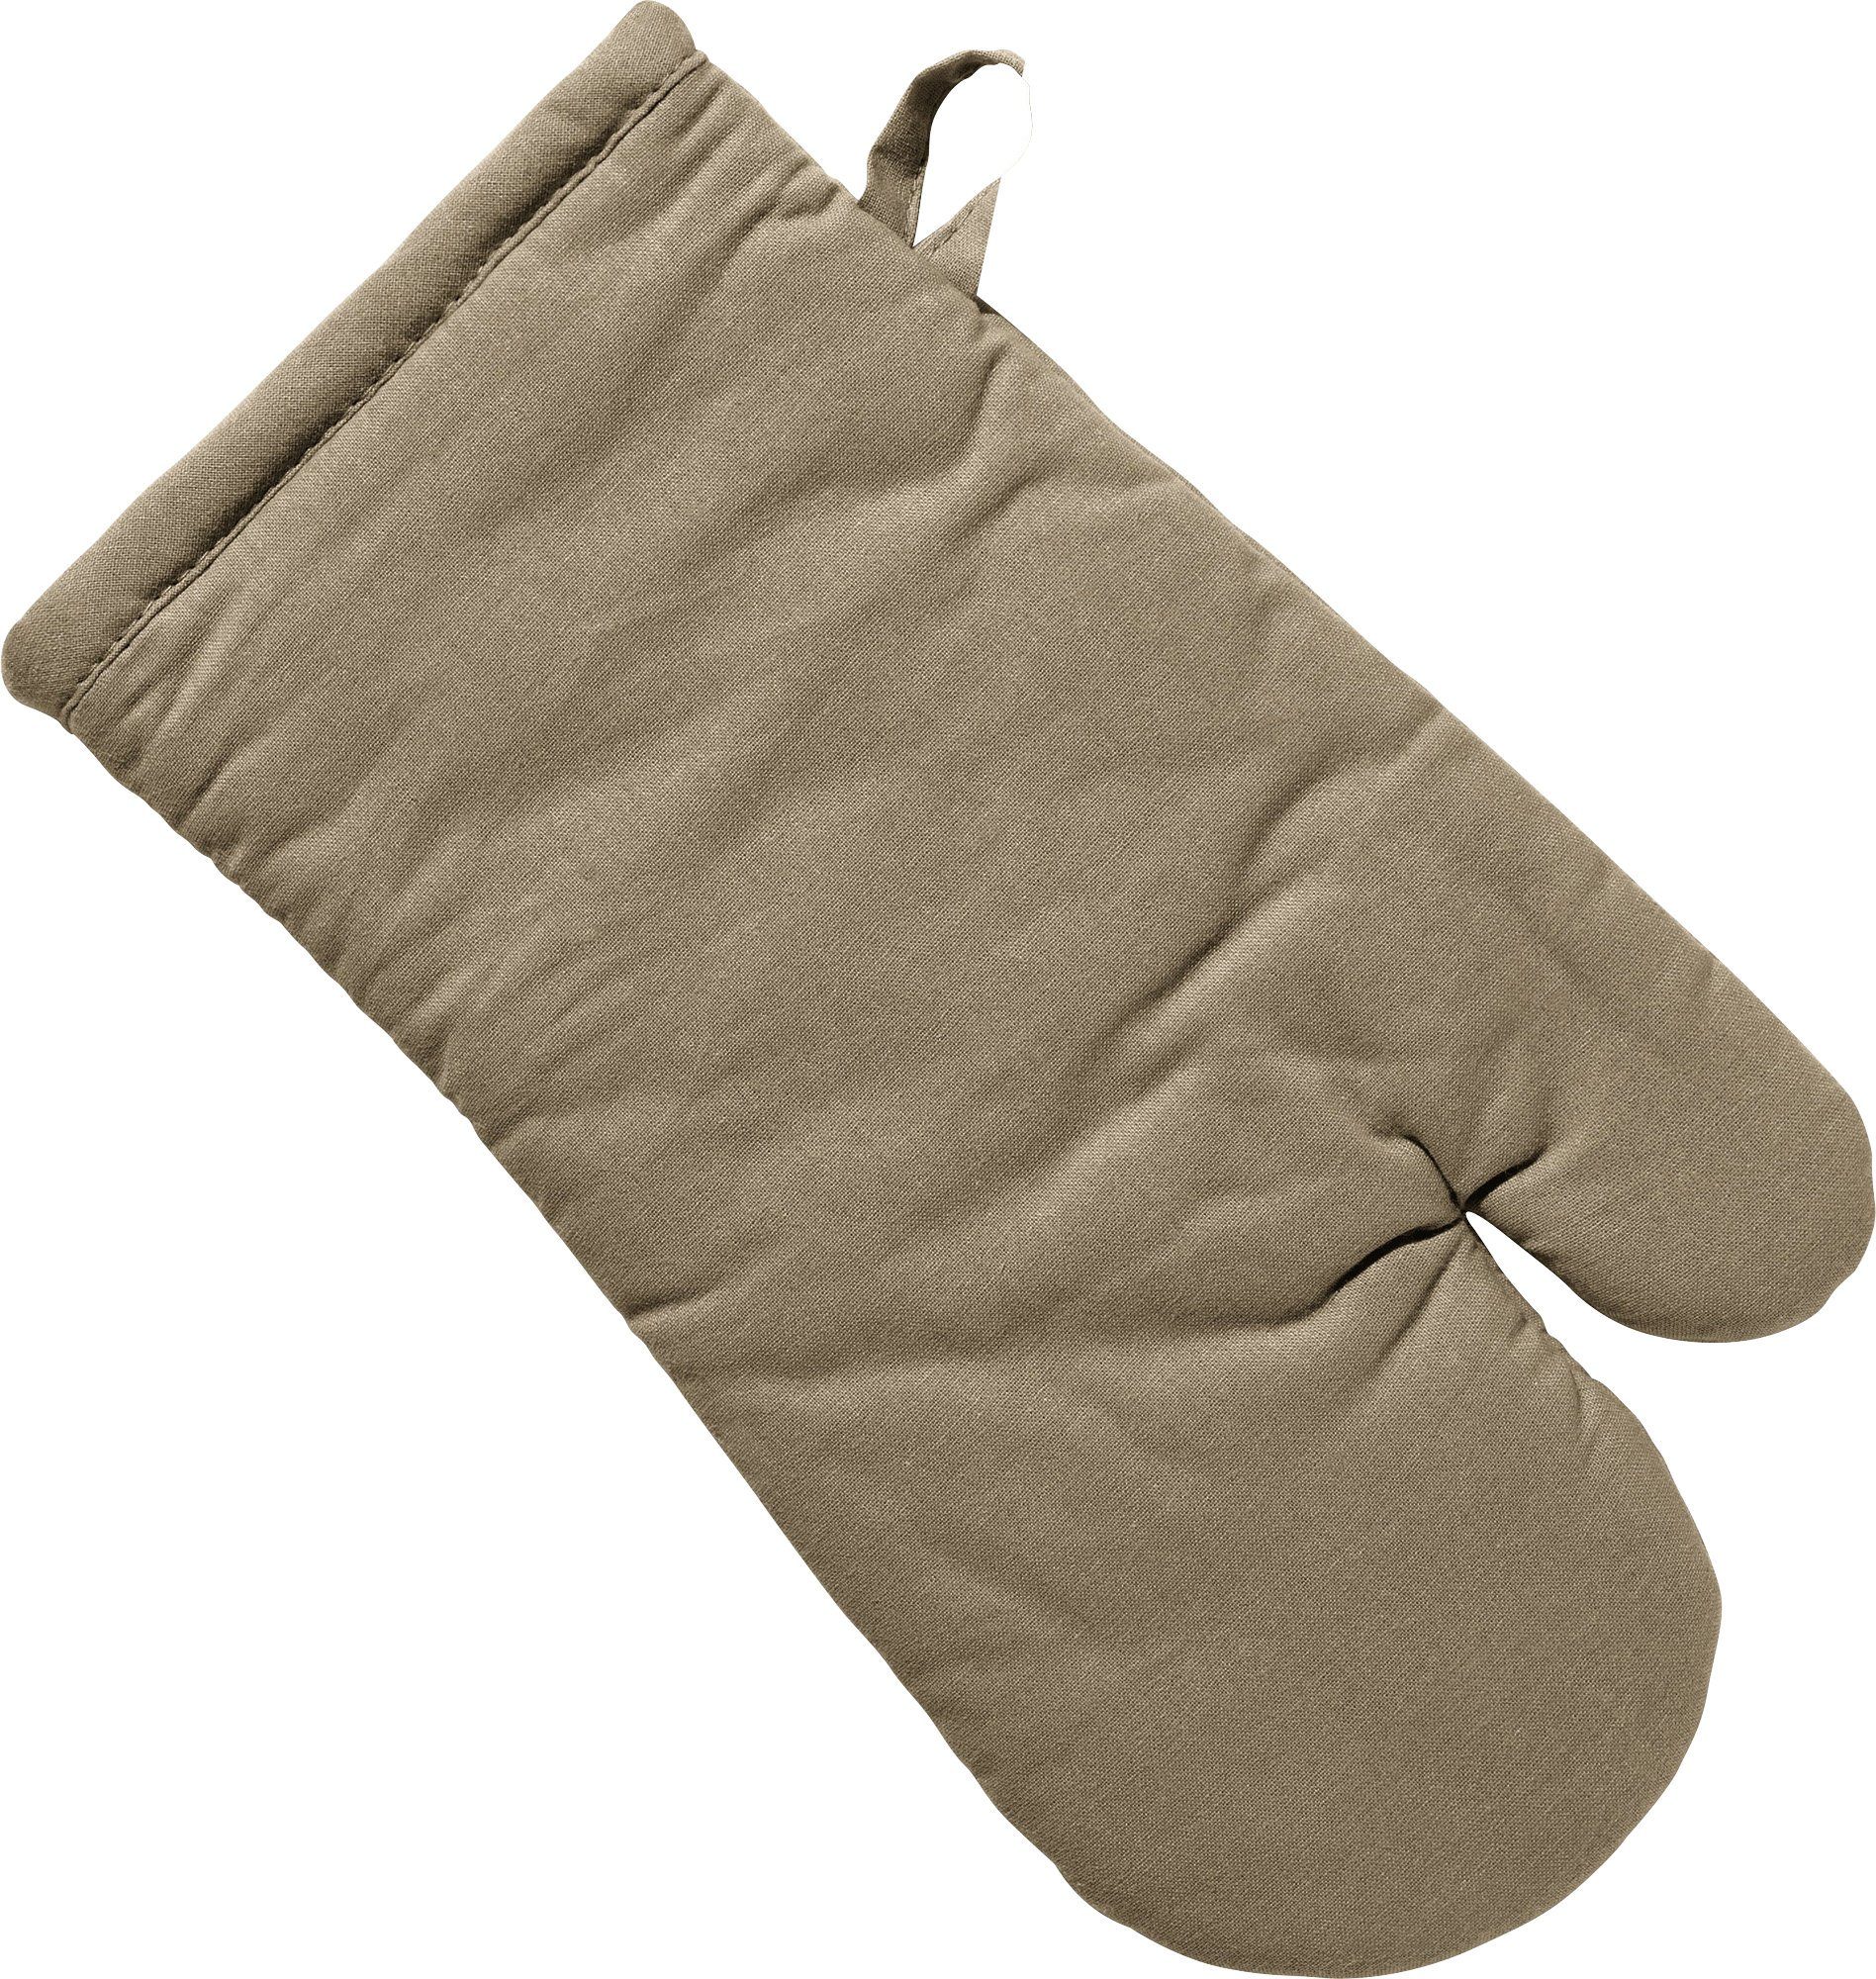 (1-tlg), Topflappen taupe Uni Ofenhandschuh REDBEST "Seattle",